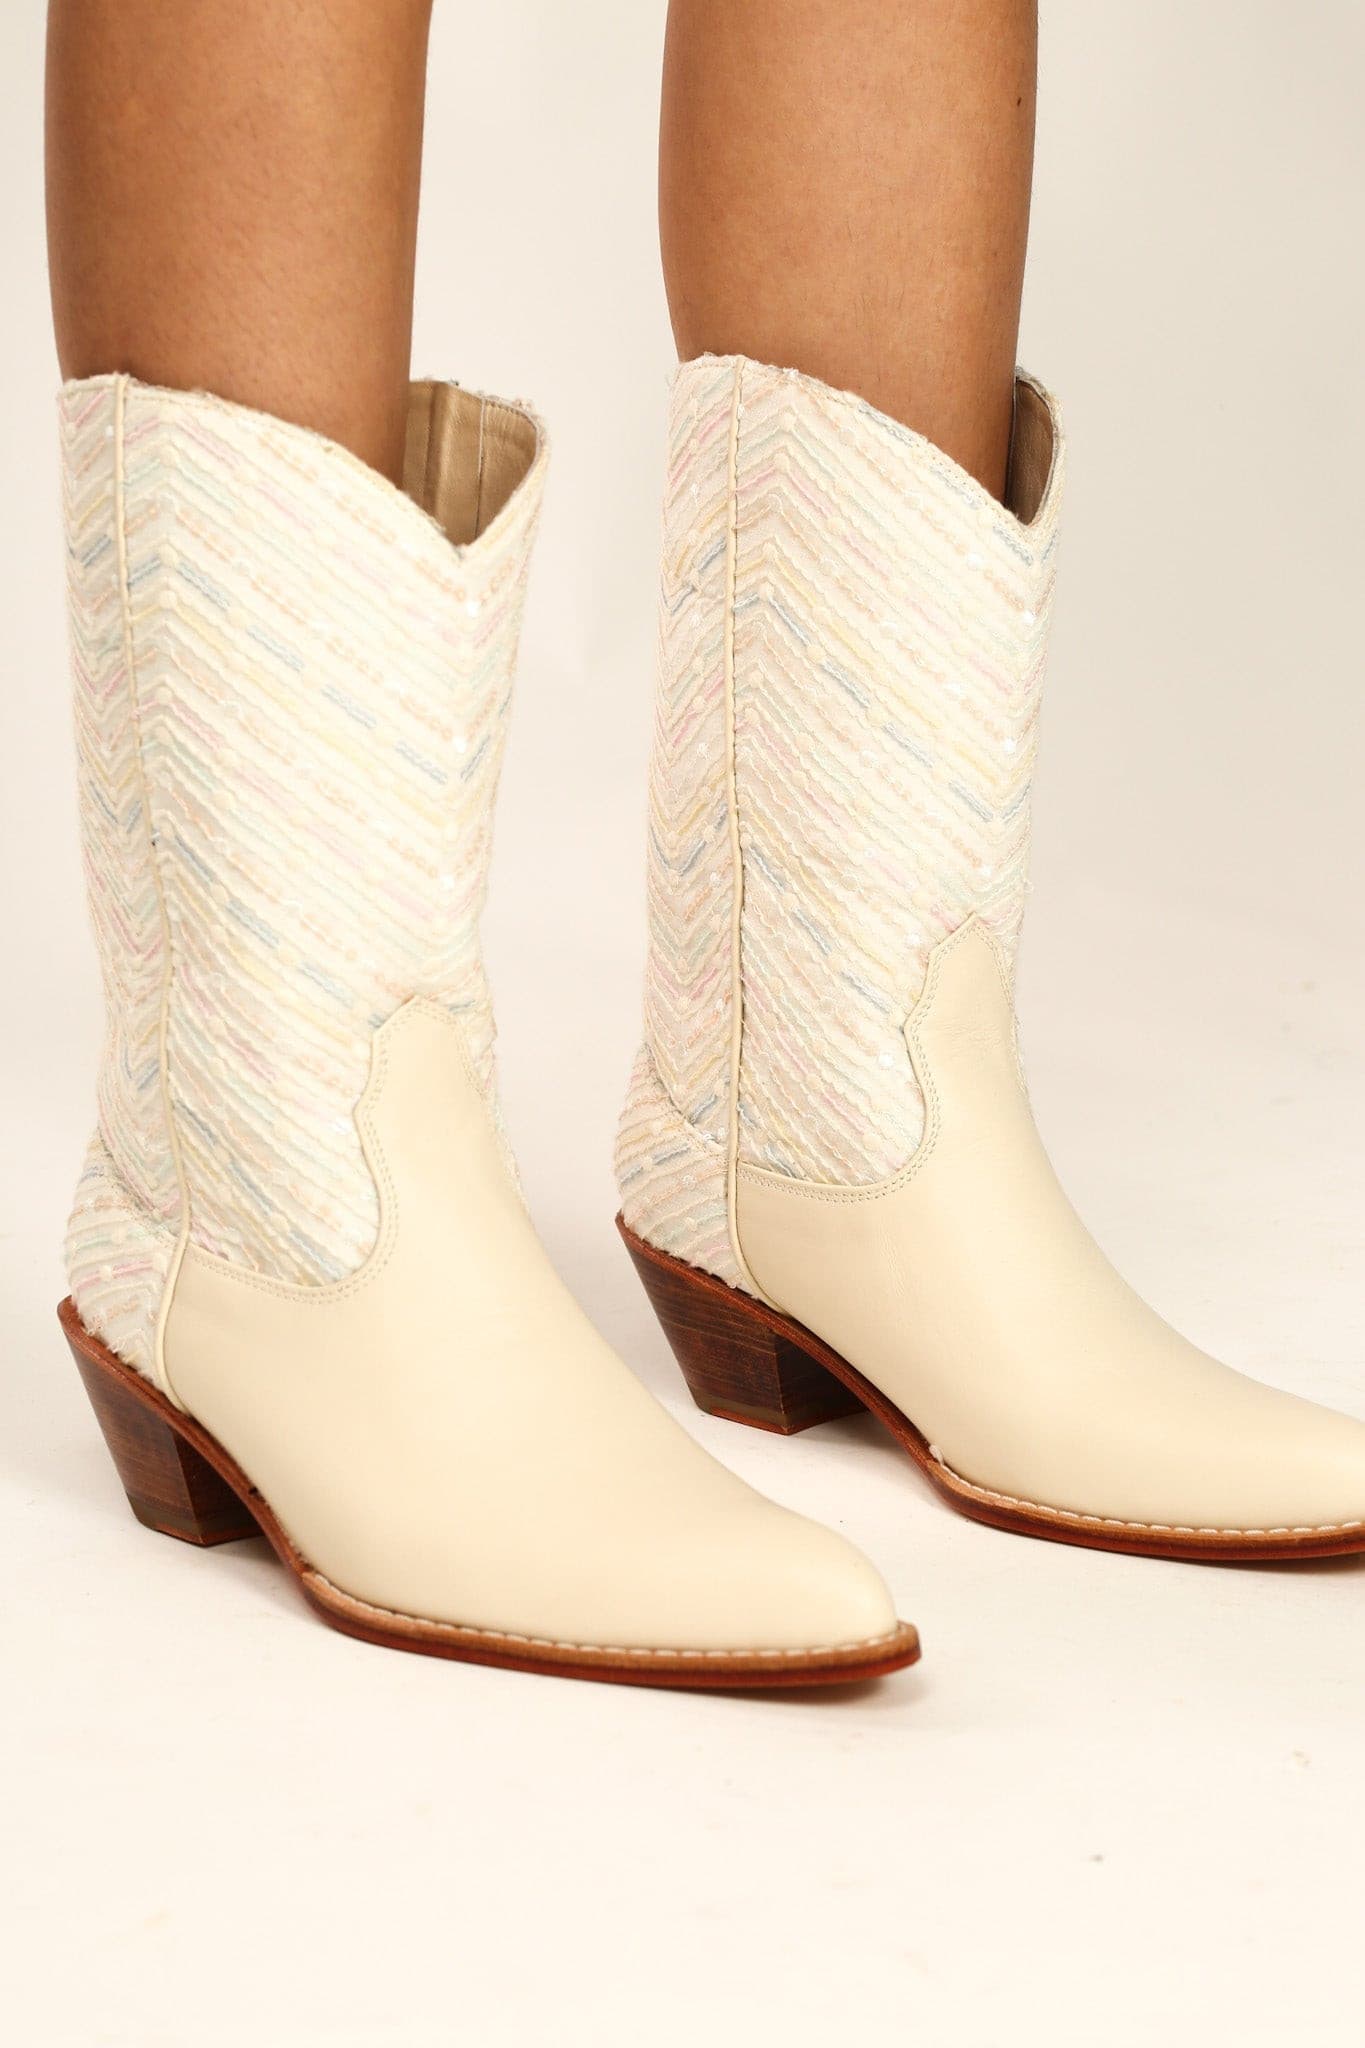 SEQUIN EMBROIDERED BOOTS NANCY - sustainably made MOMO NEW YORK sustainable clothing, boots slow fashion